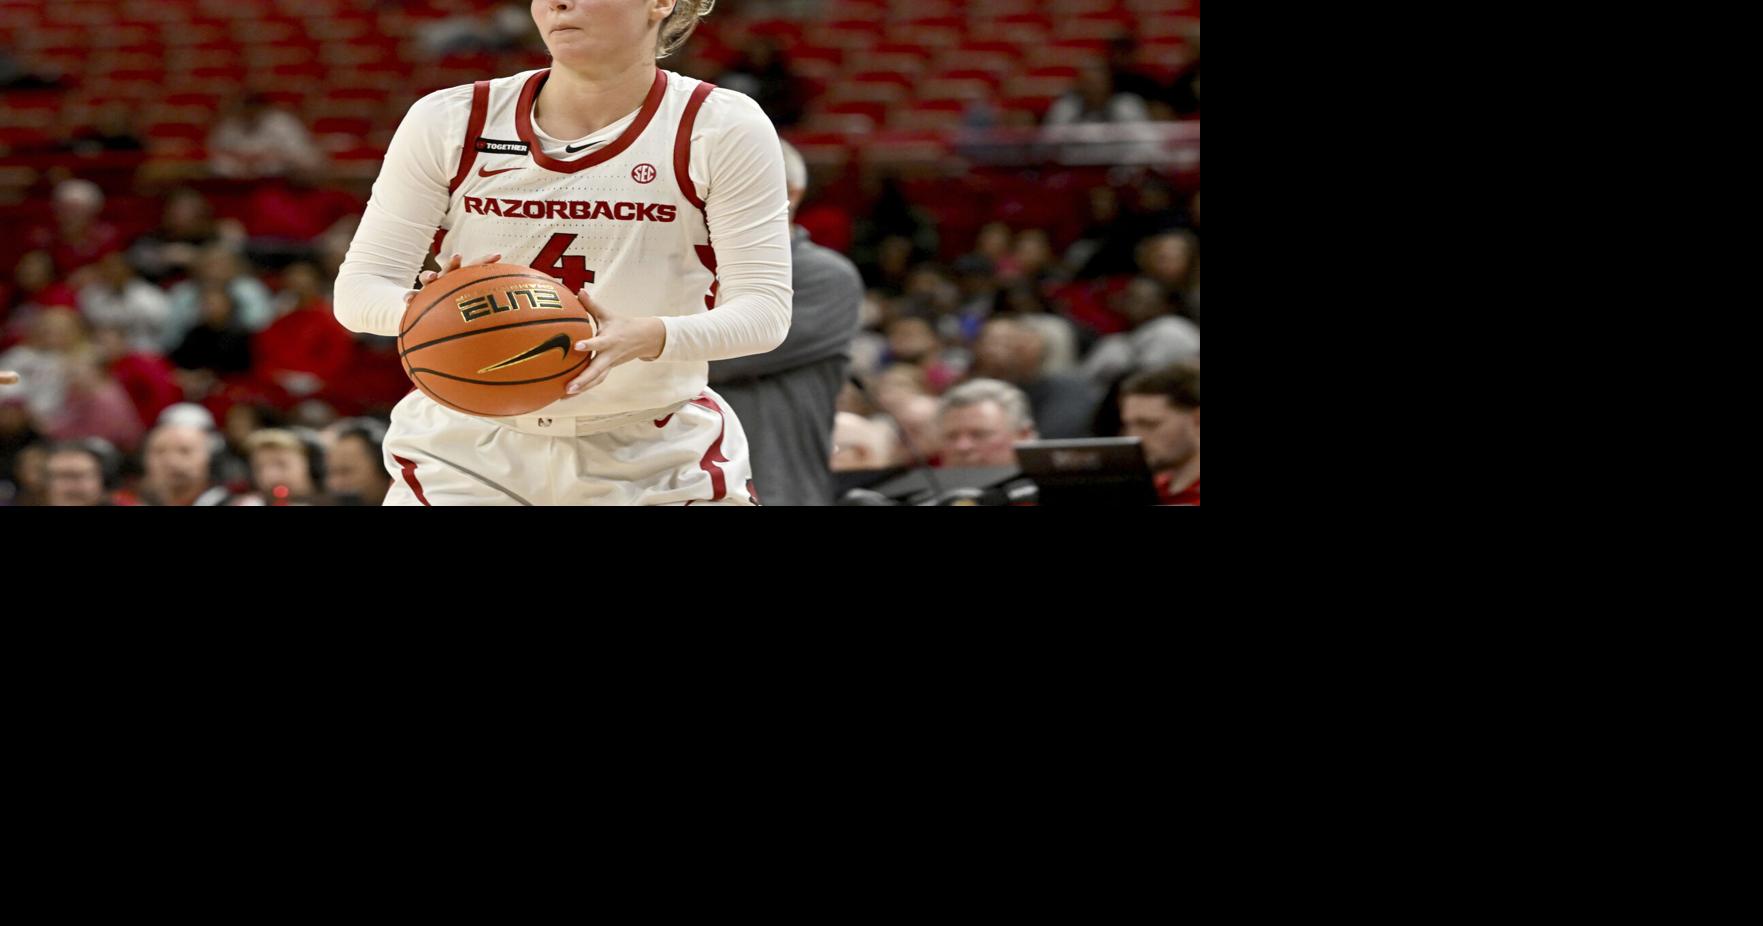 Homecoming for Saylor Poffenbarger: Middletown grad transferring to Maryland to play for Terps